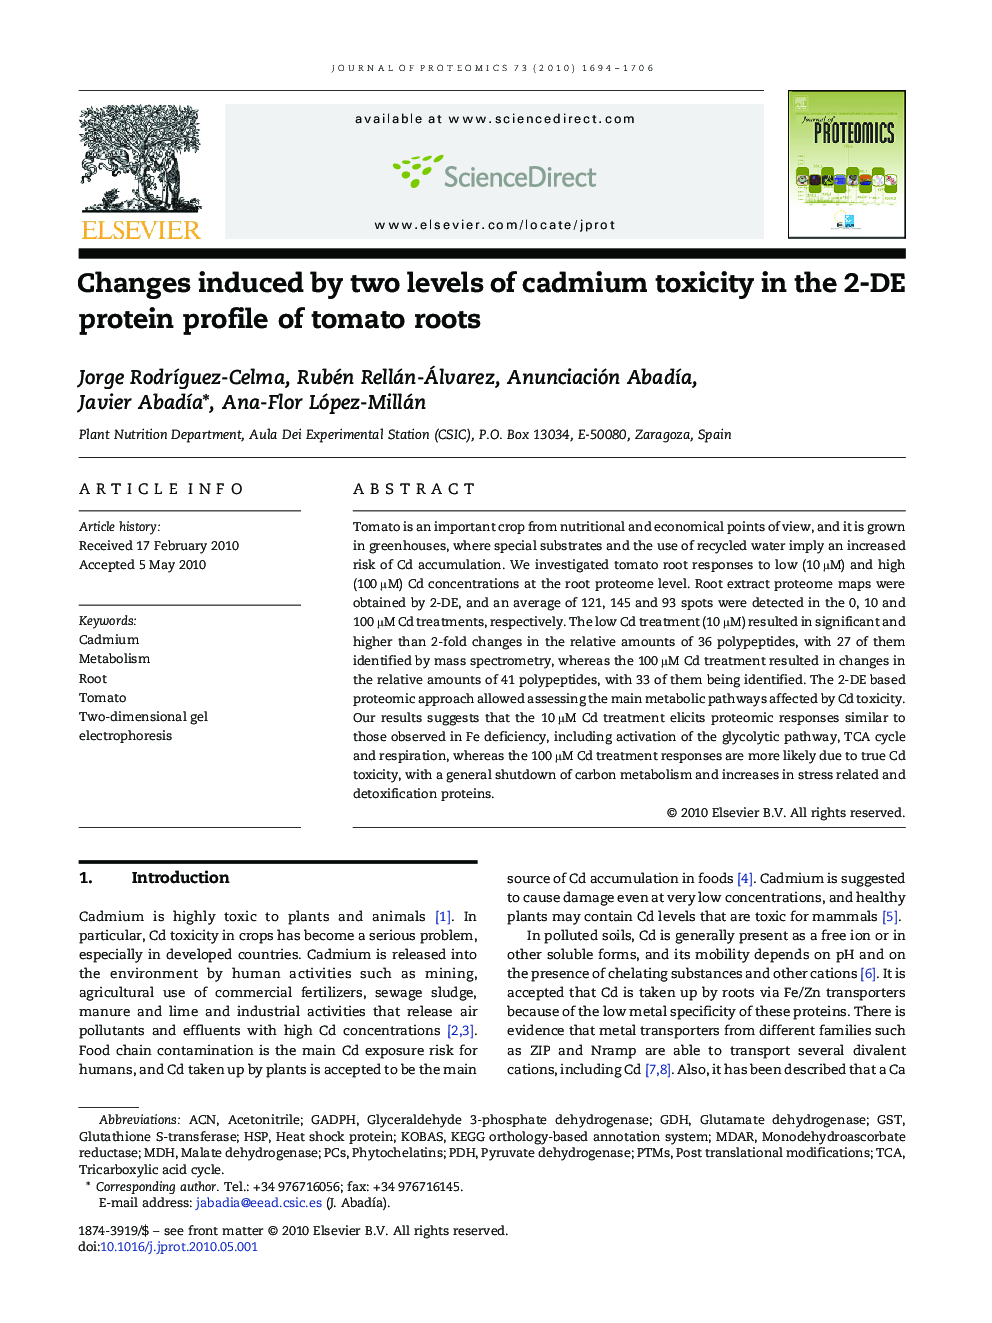 Changes induced by two levels of cadmium toxicity in the 2-DE protein profile of tomato roots